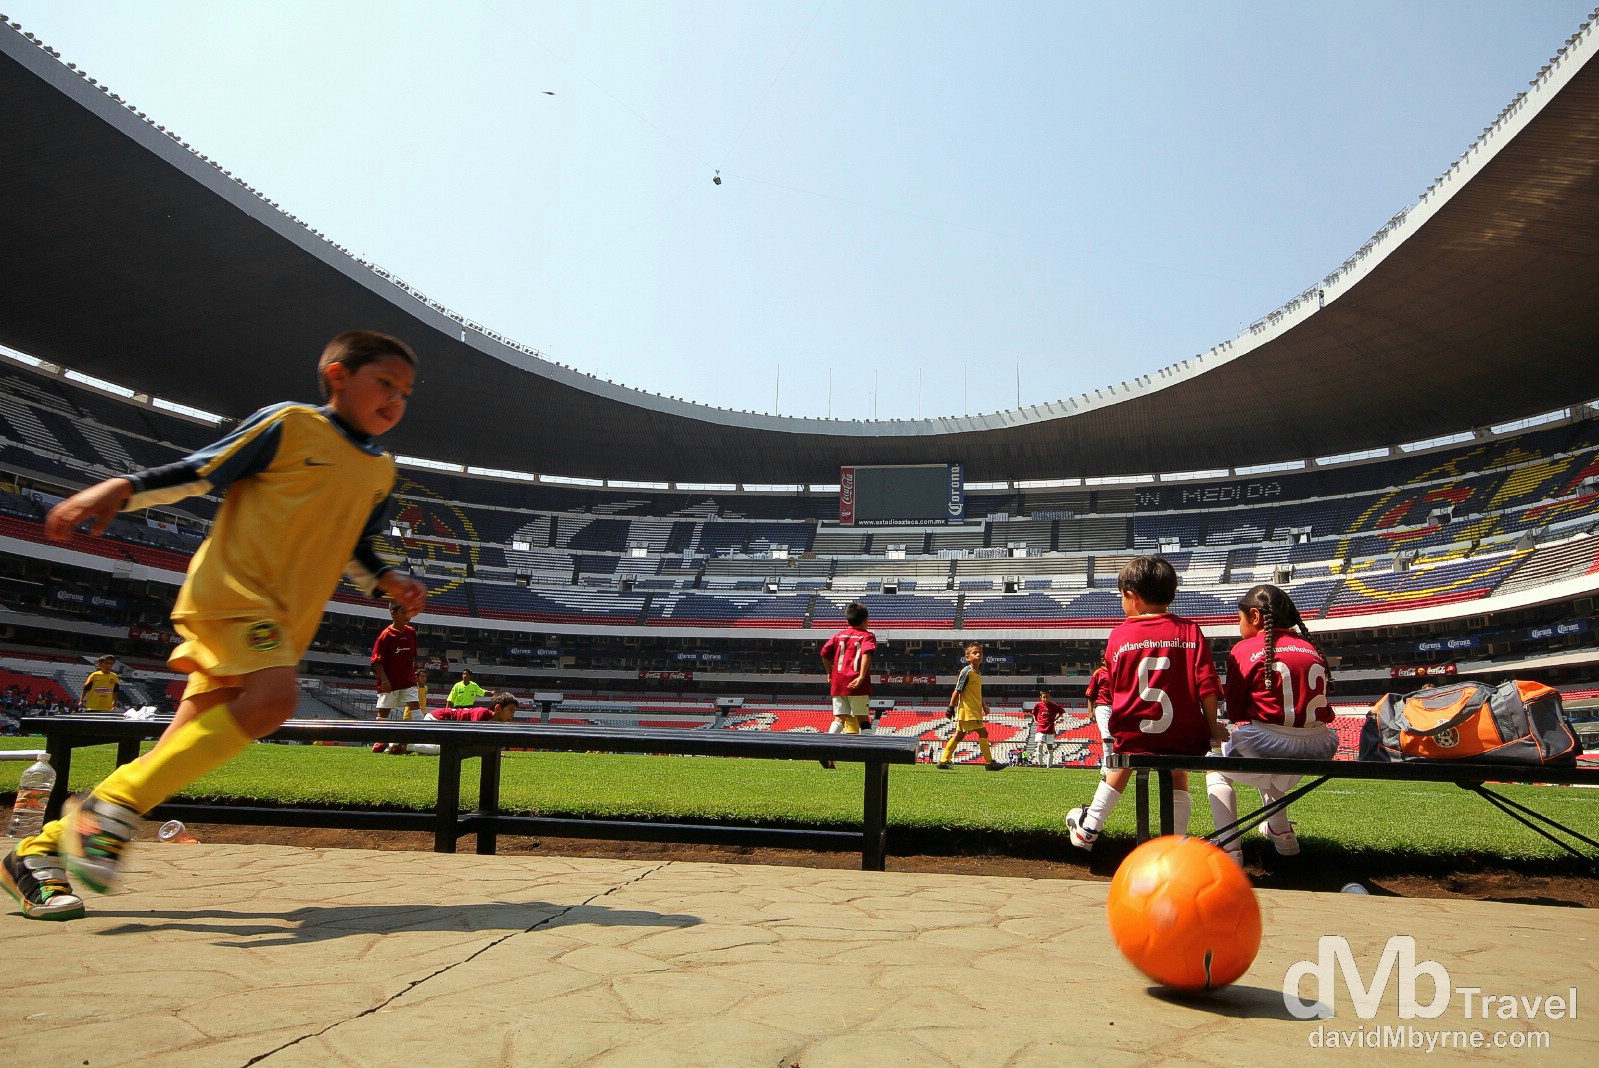 Kids playing soccer in the Estadio Azteca. I loved the tour I took of the Azteca Stadium but was amazed how small one of the biggest soccer stadiums in the world looked in person. TV really does make things look so much bigger. Estadio Azteca, Mexico City. April 28th 2013.